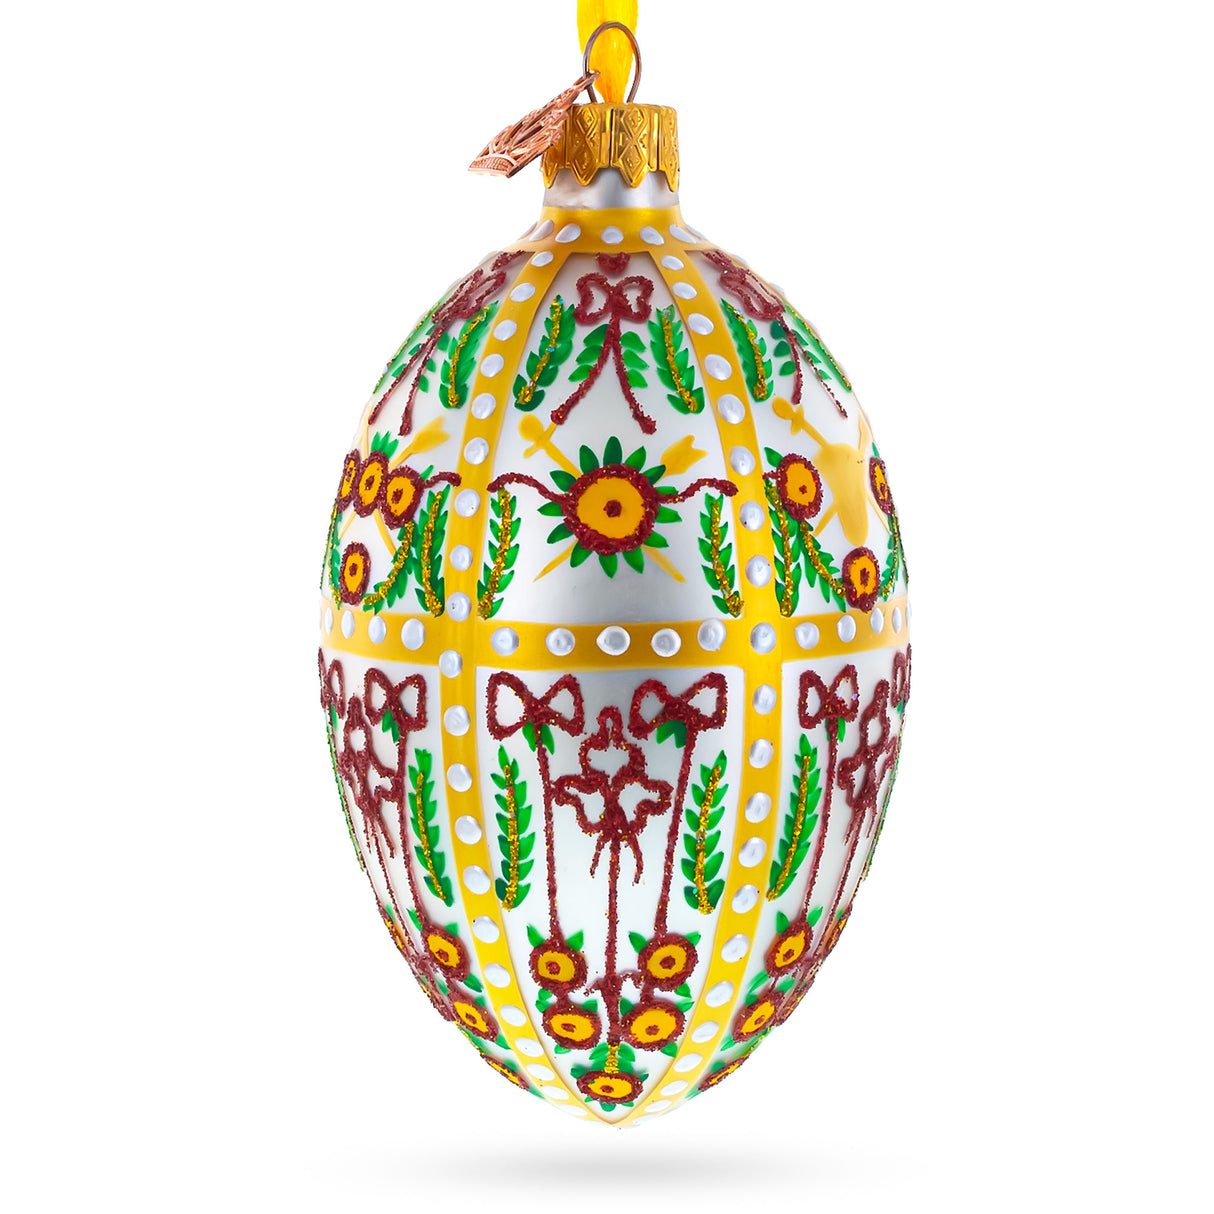 Glass 1901 Gatchina Palace Royal Glass Egg Ornament 4 Inches in White color Oval